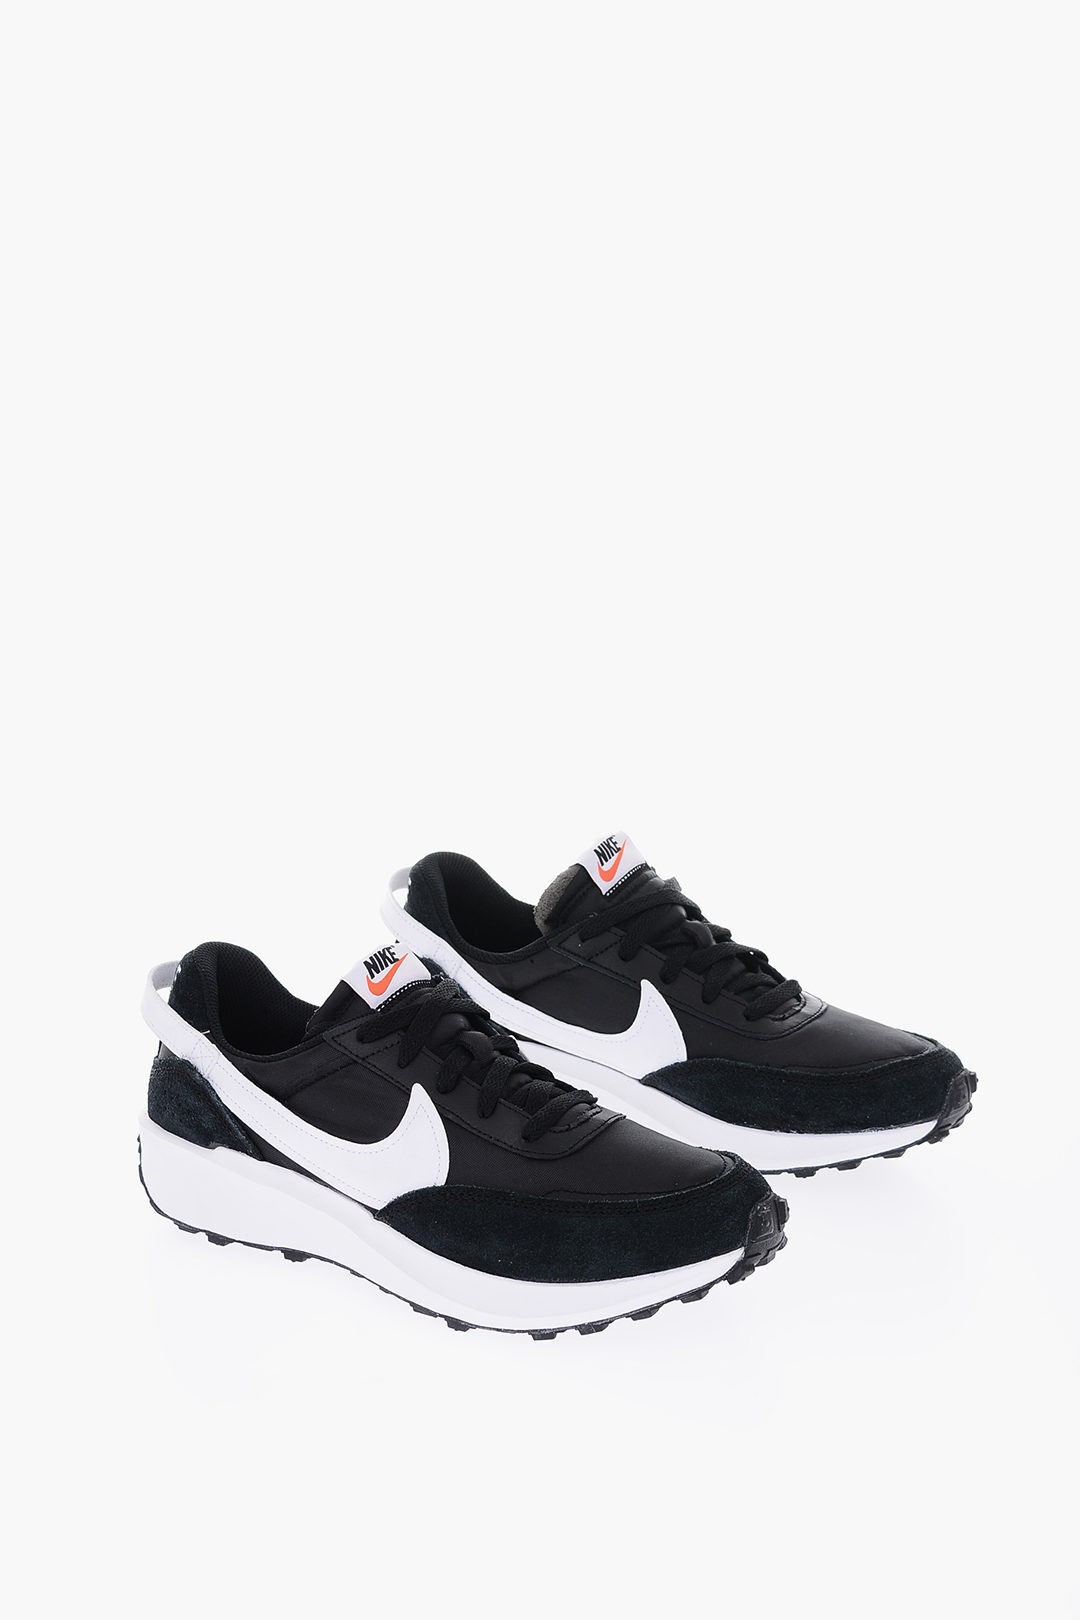 NIKE ナイキ スニーカー DH9522-001 メンズ SUEDE DETAILS FABRIC WAFFLE DEBUT SNEAKERS 【関税・送料無料】【ラッピング無料】 dk